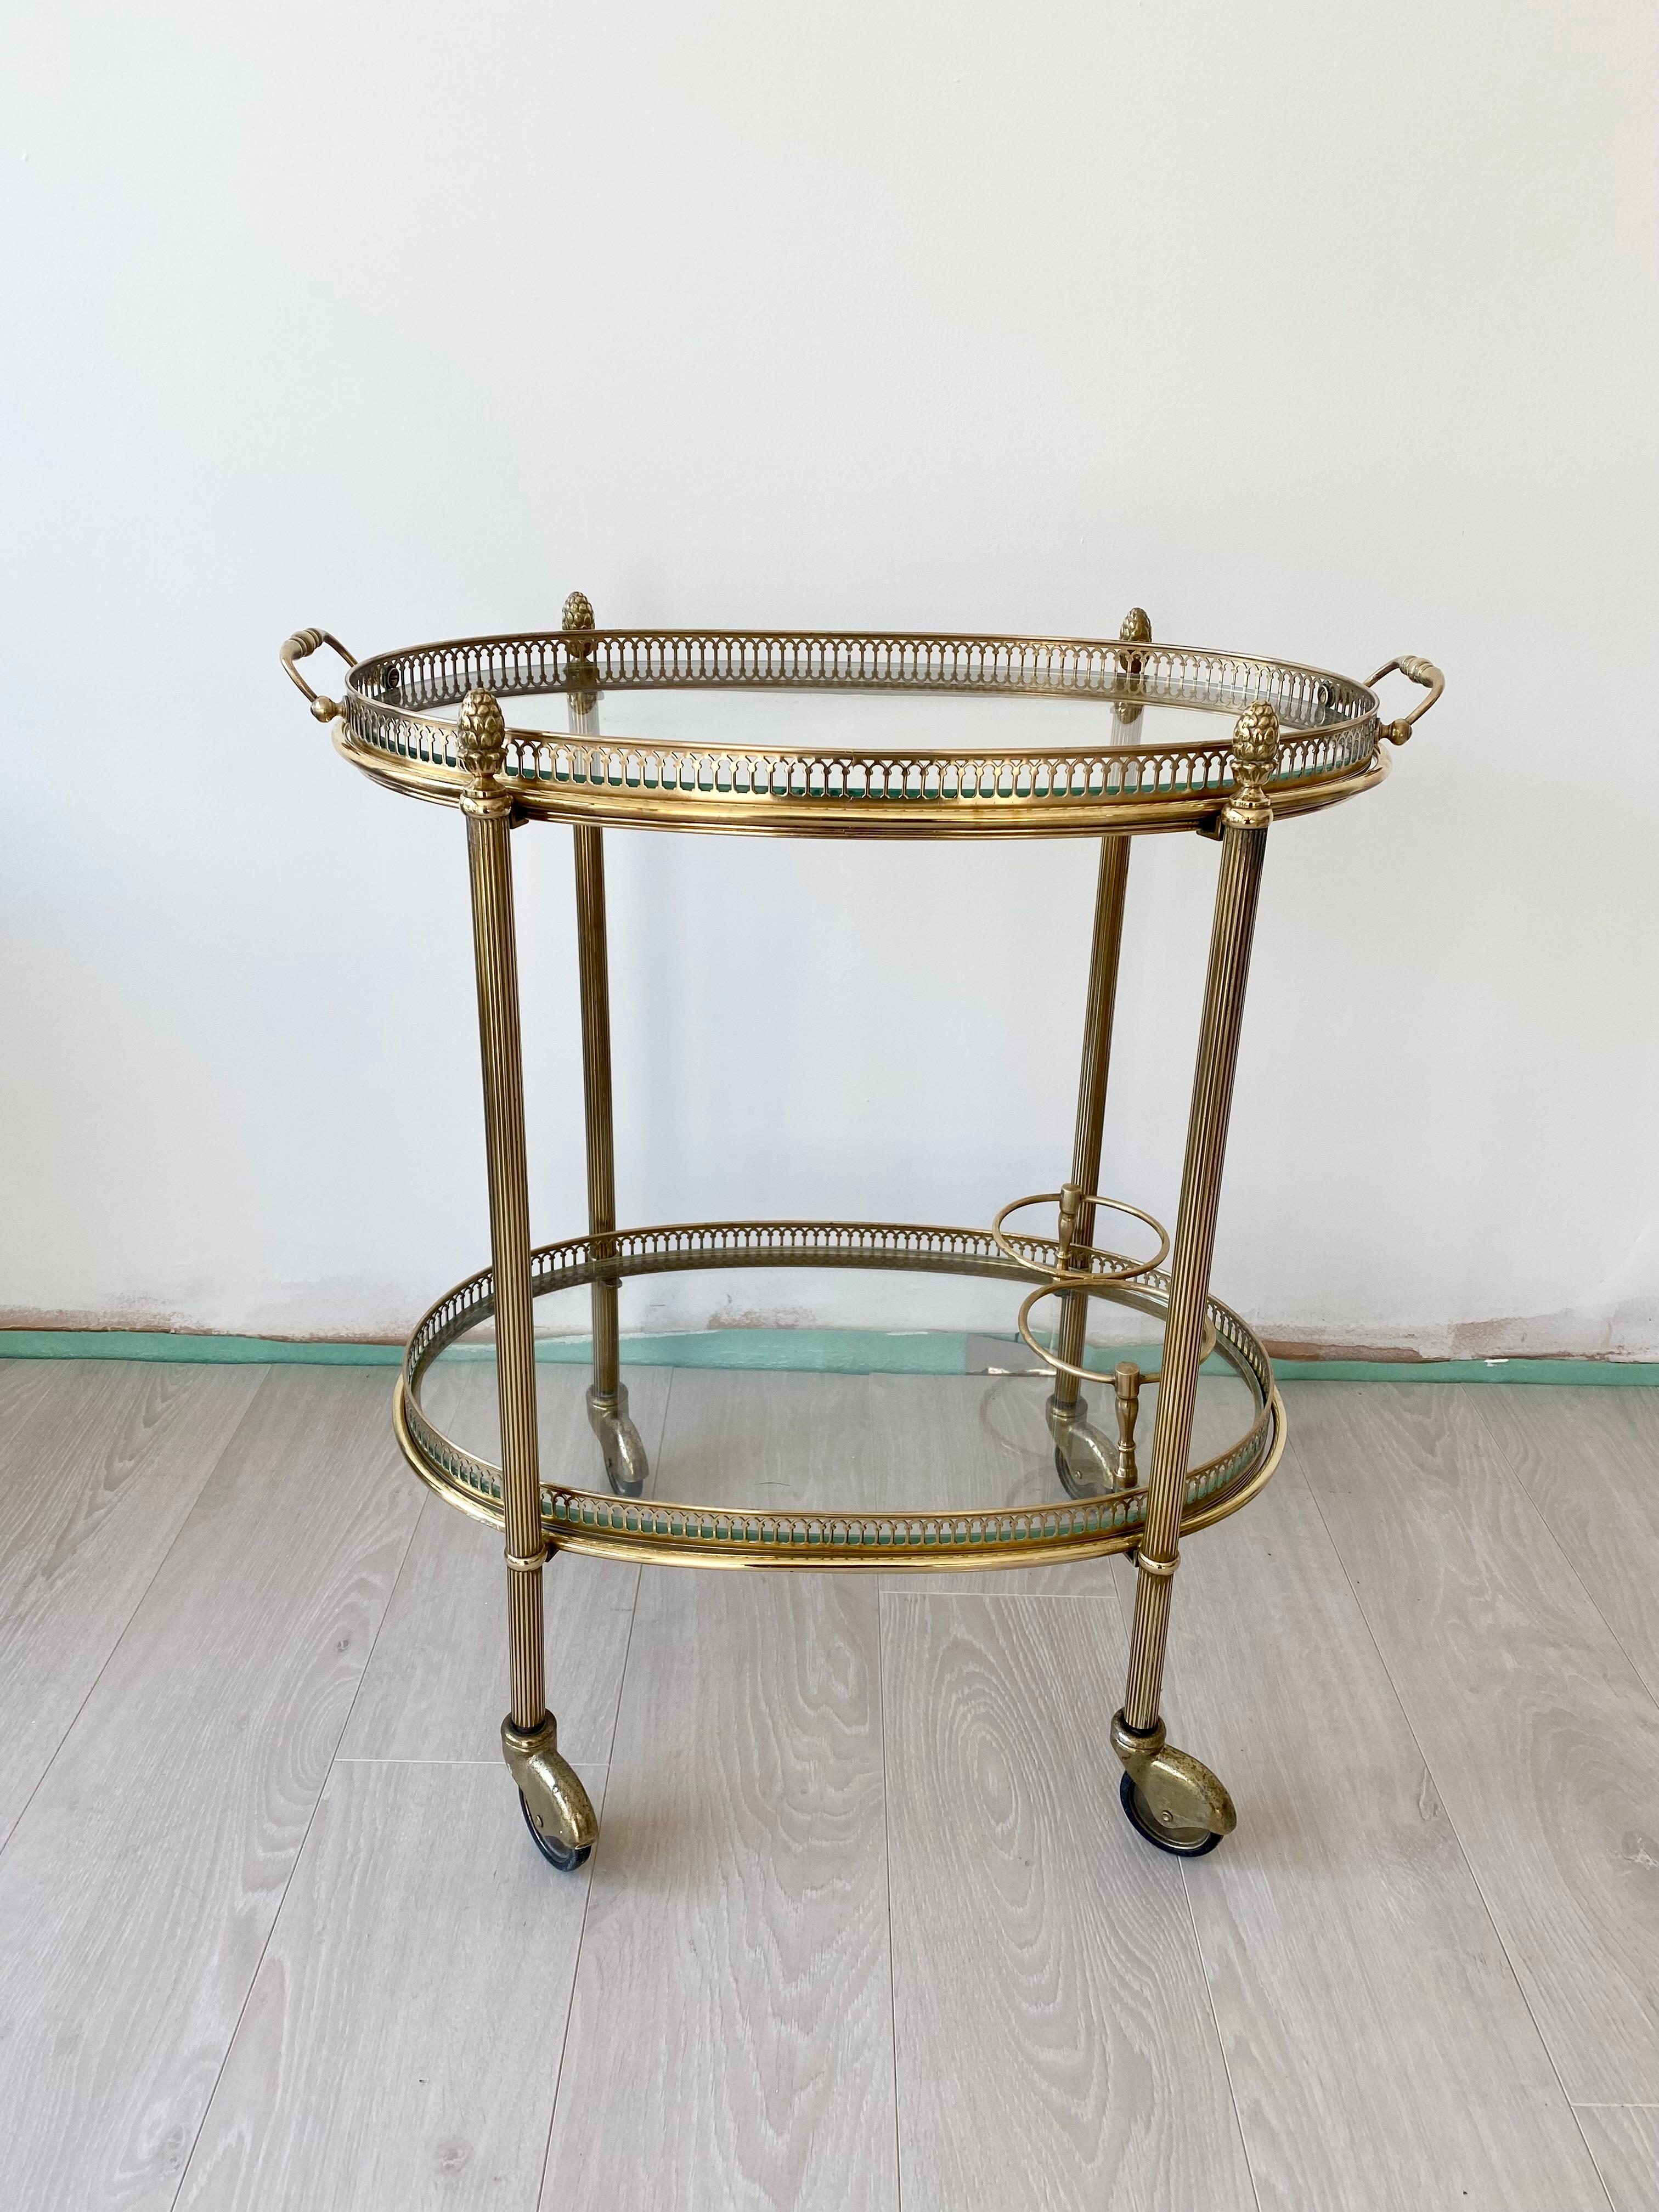 Perfect for smaller spaces, this vintage brass cocktail trolley from France circa 1950

Lift off top tray and bottle holder to lower tier

Polished brass frame

The trolley measures 60cm tall, 55cm wide and 38cm deep - these are its widest